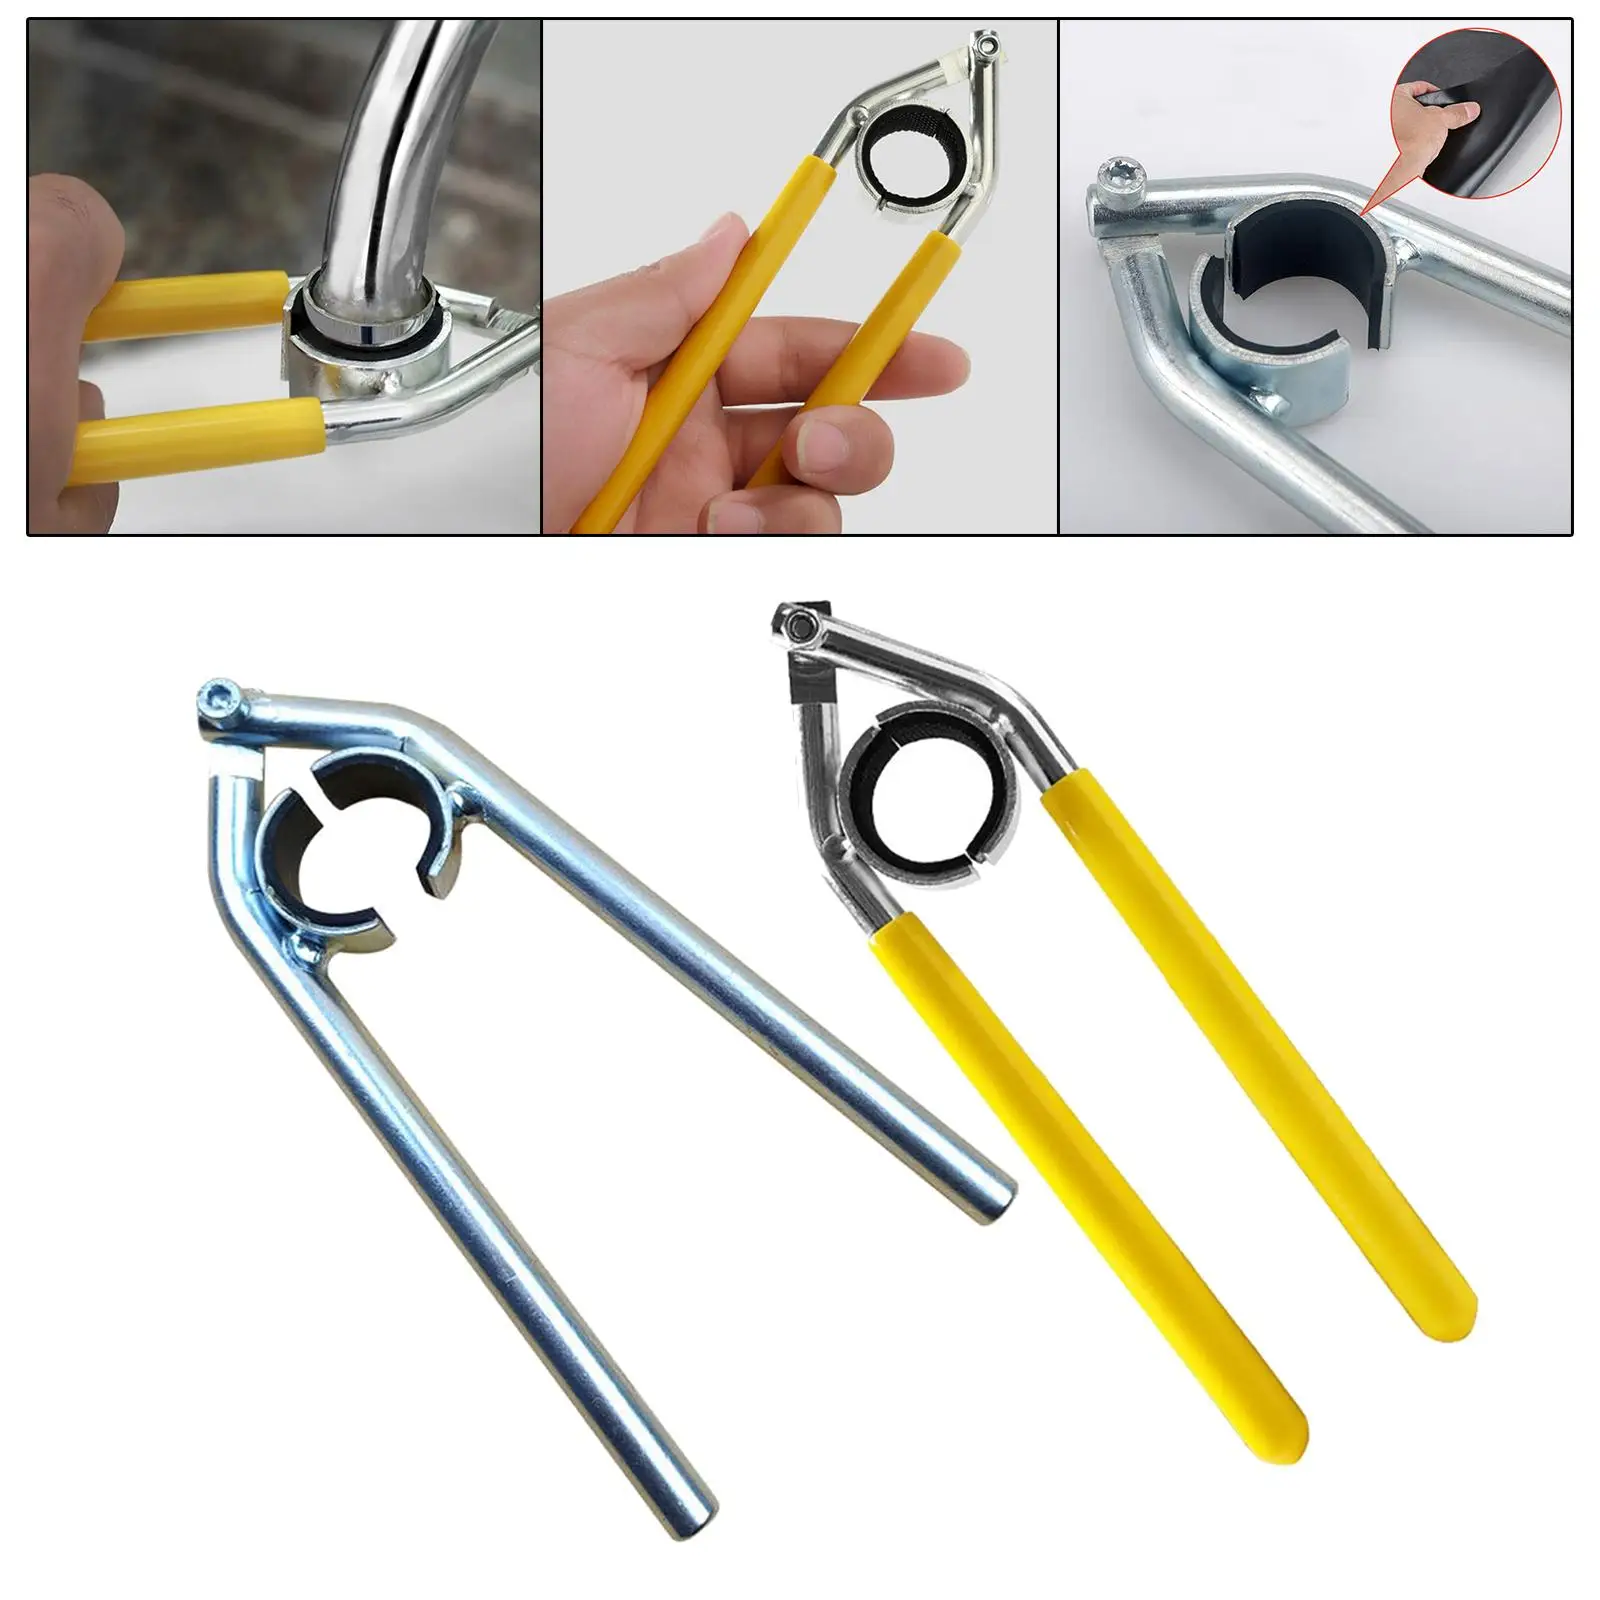 Faucet Aerator Wrench Carbon Steel Water Hose Nozzle Knurling Tool Od 21.5~27mm Adjustable Wrench Faucet Bubbler Tap Wrench